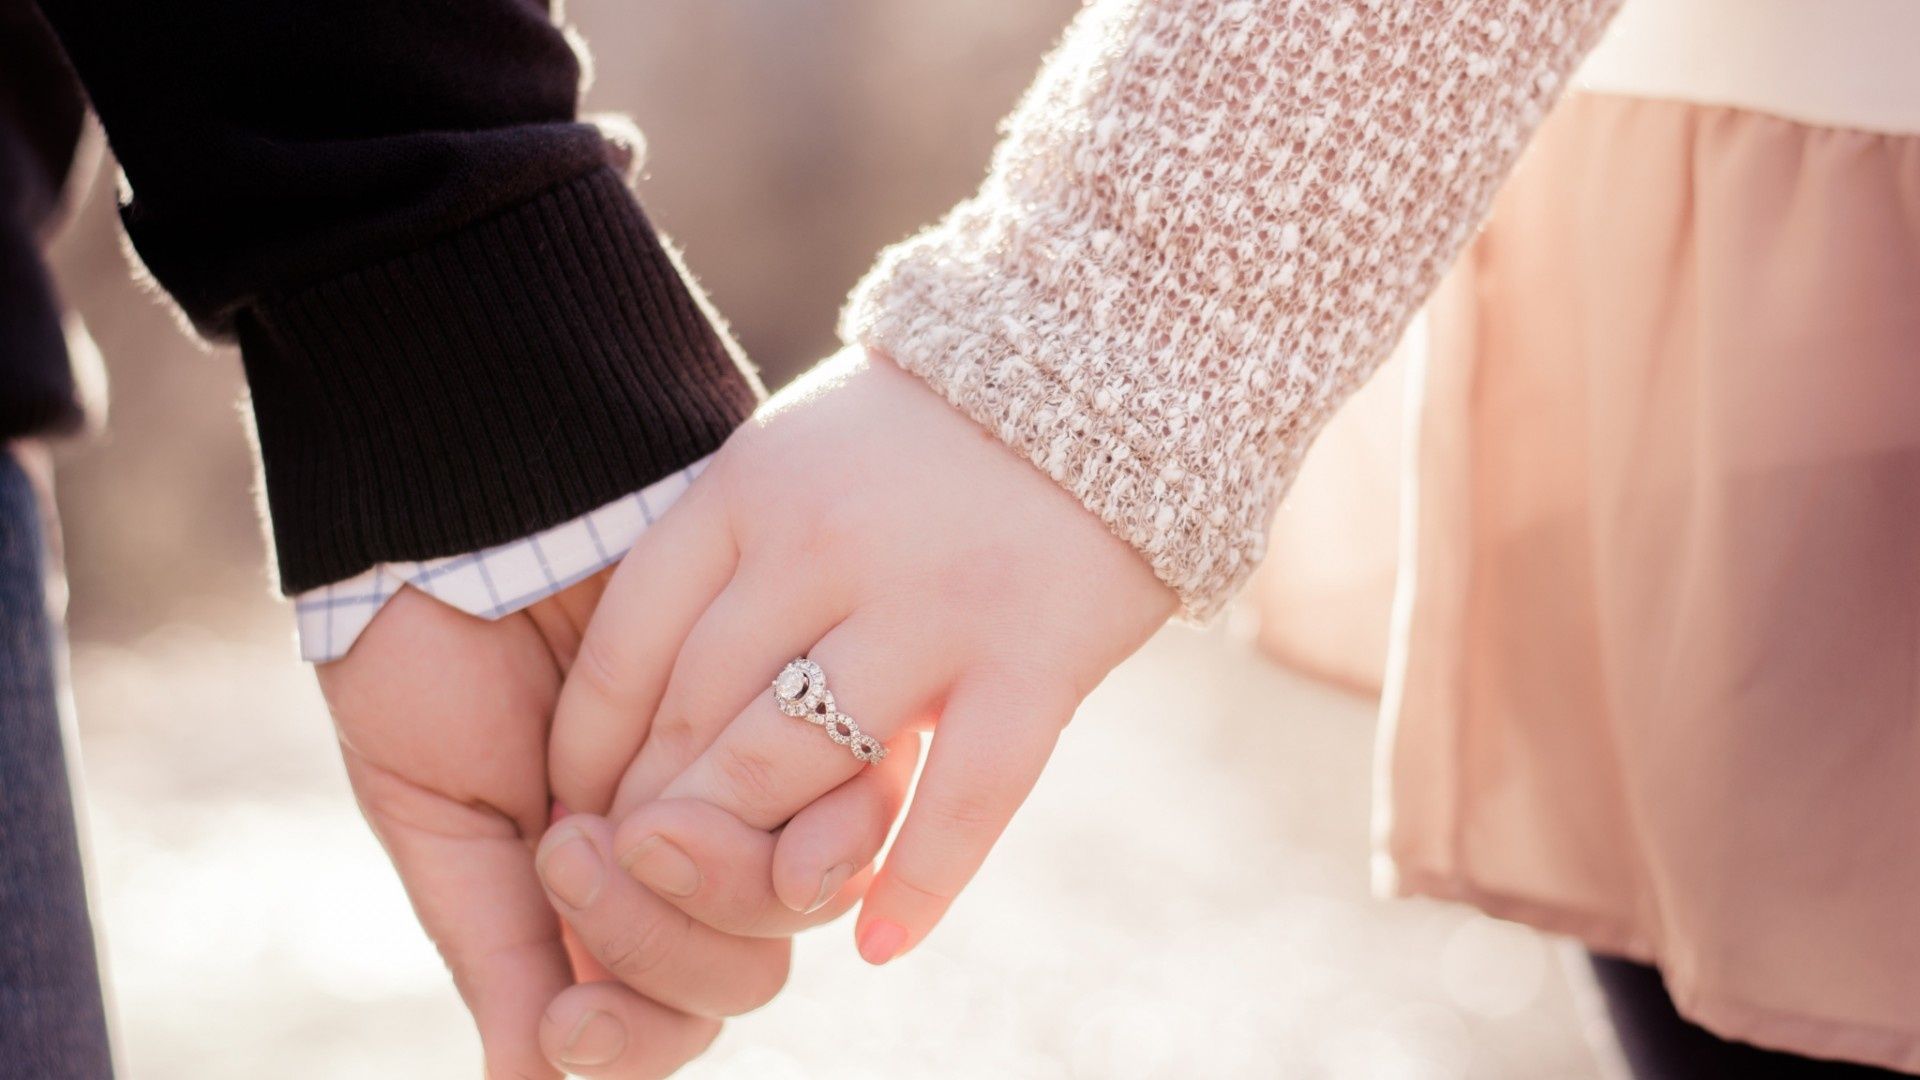 Love Couple Hands Ring Wallpapers.